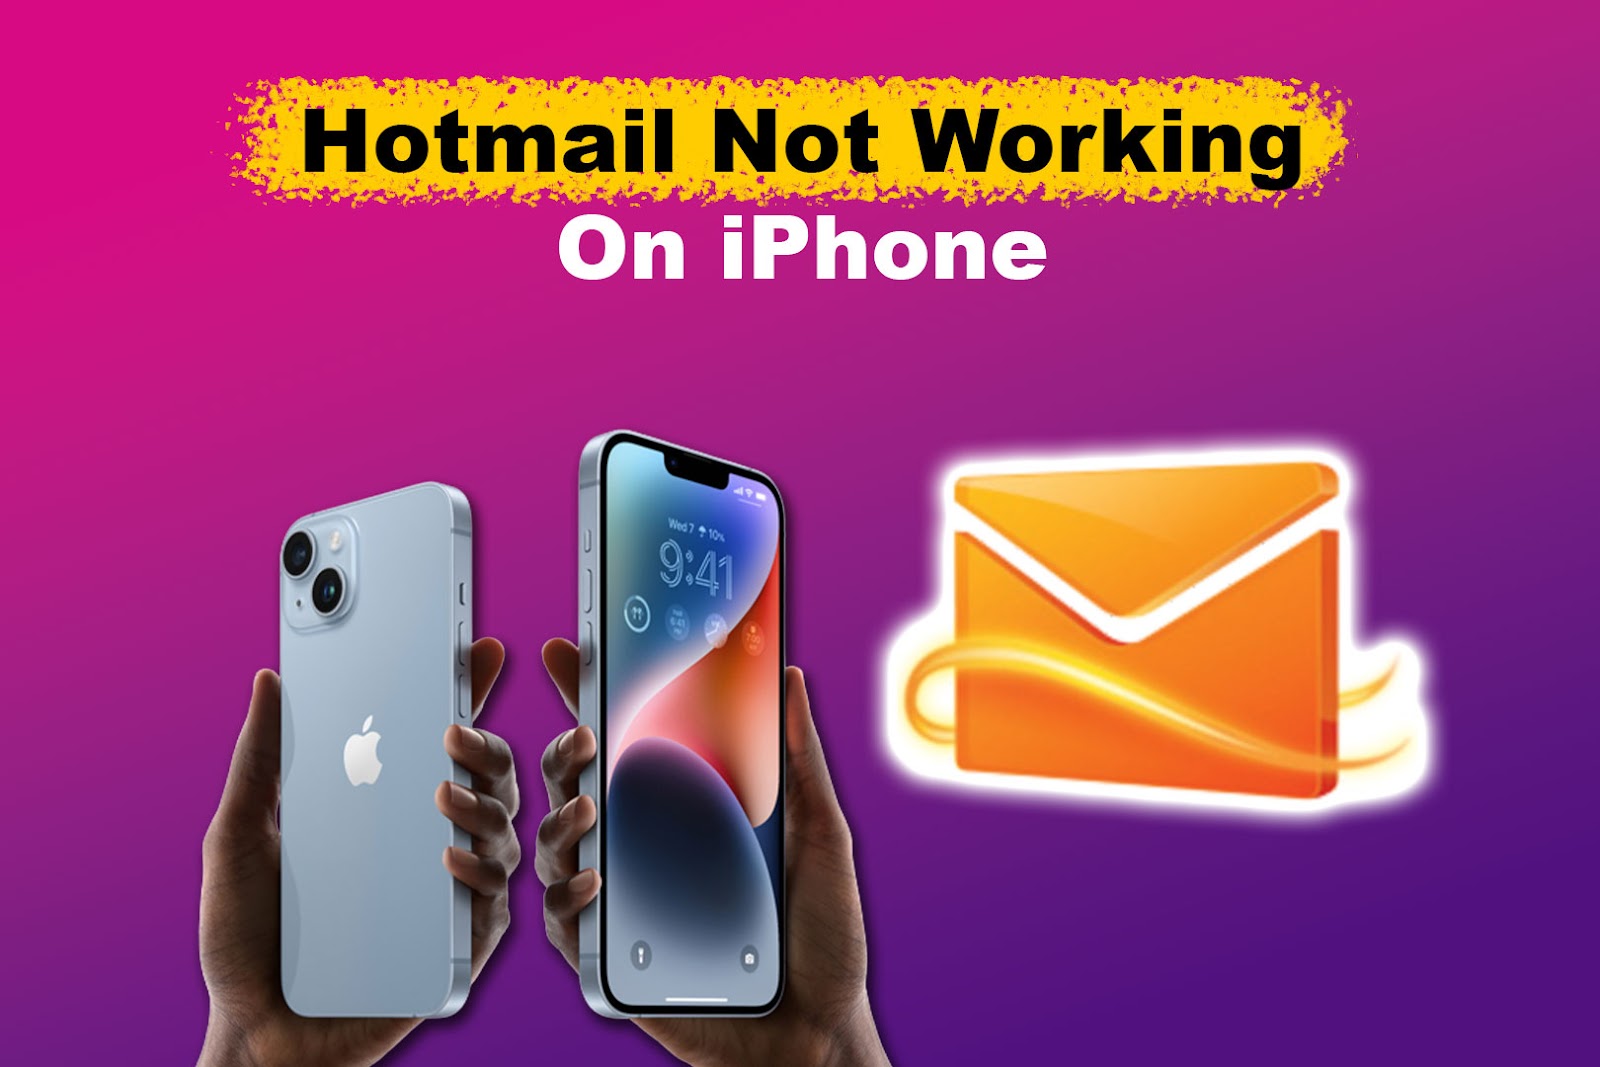 Hotmail Not Working On iPhone? [Here’s the Fix]